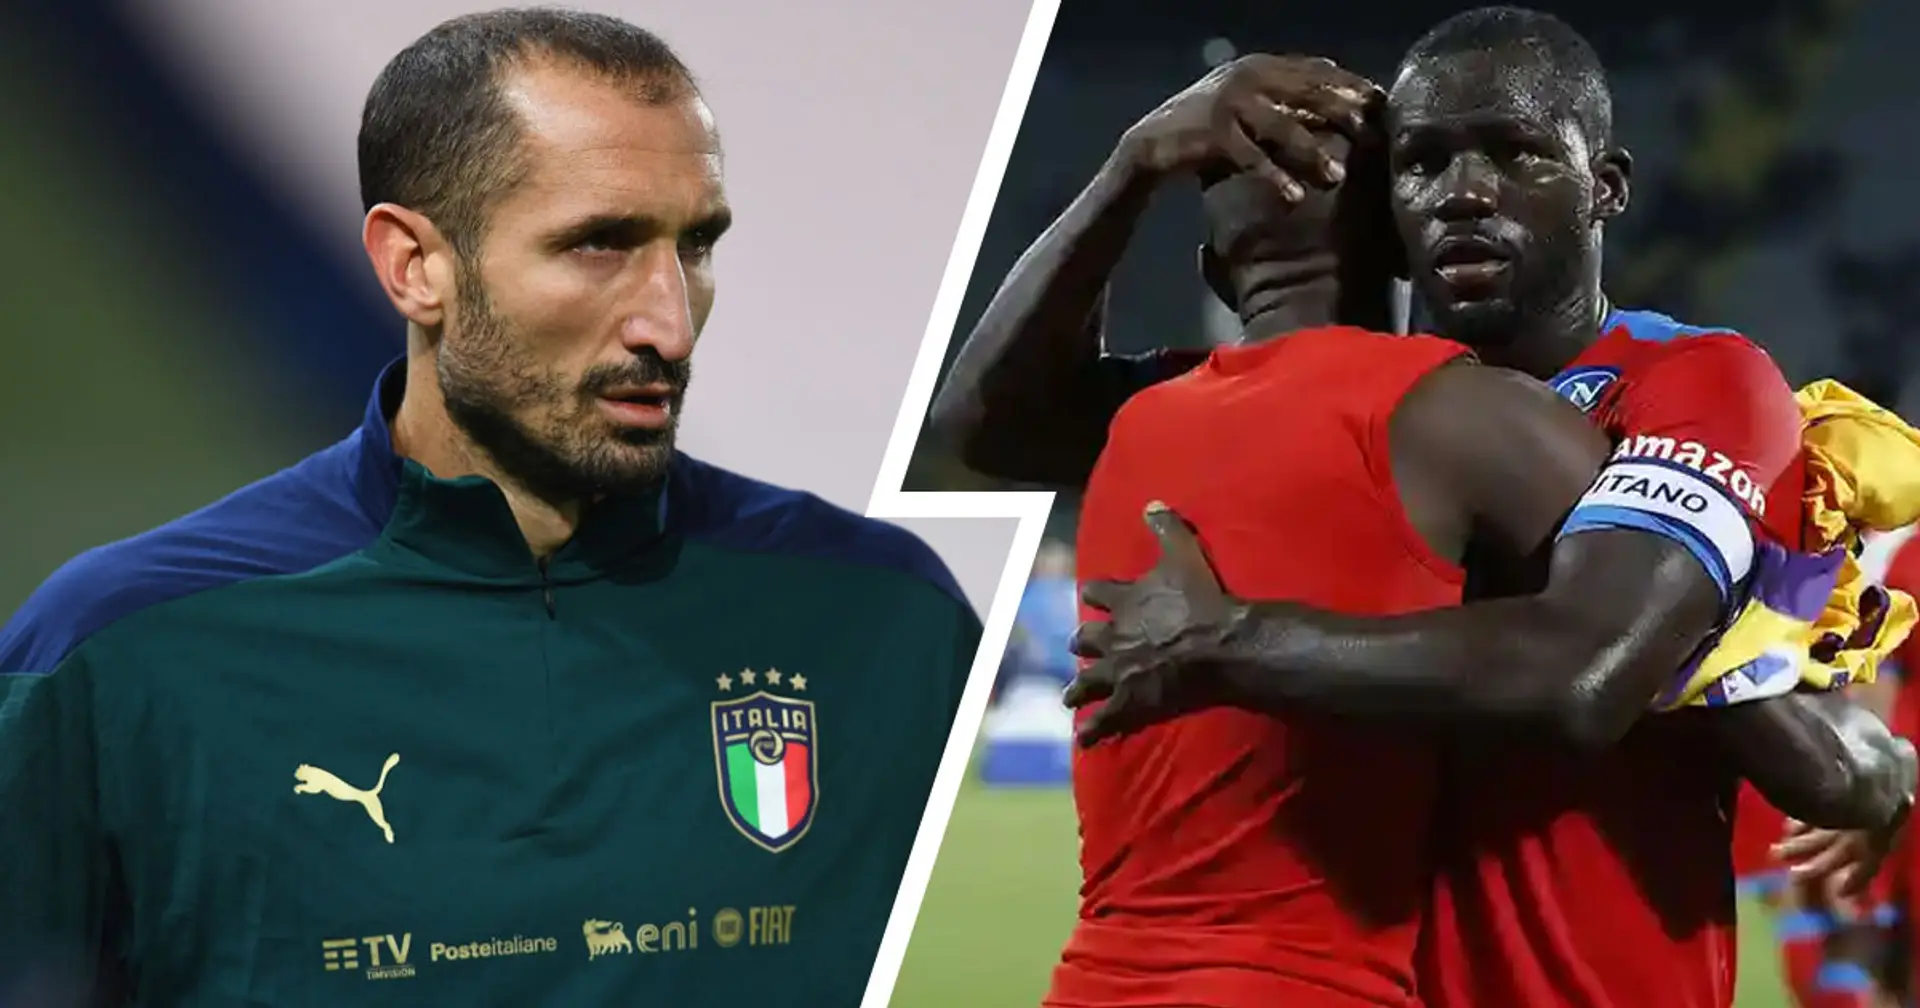 ‘Italy is not a racist country': Giorgio Chiellini opens up on Napoli players being racially abused by Fiorentina fans